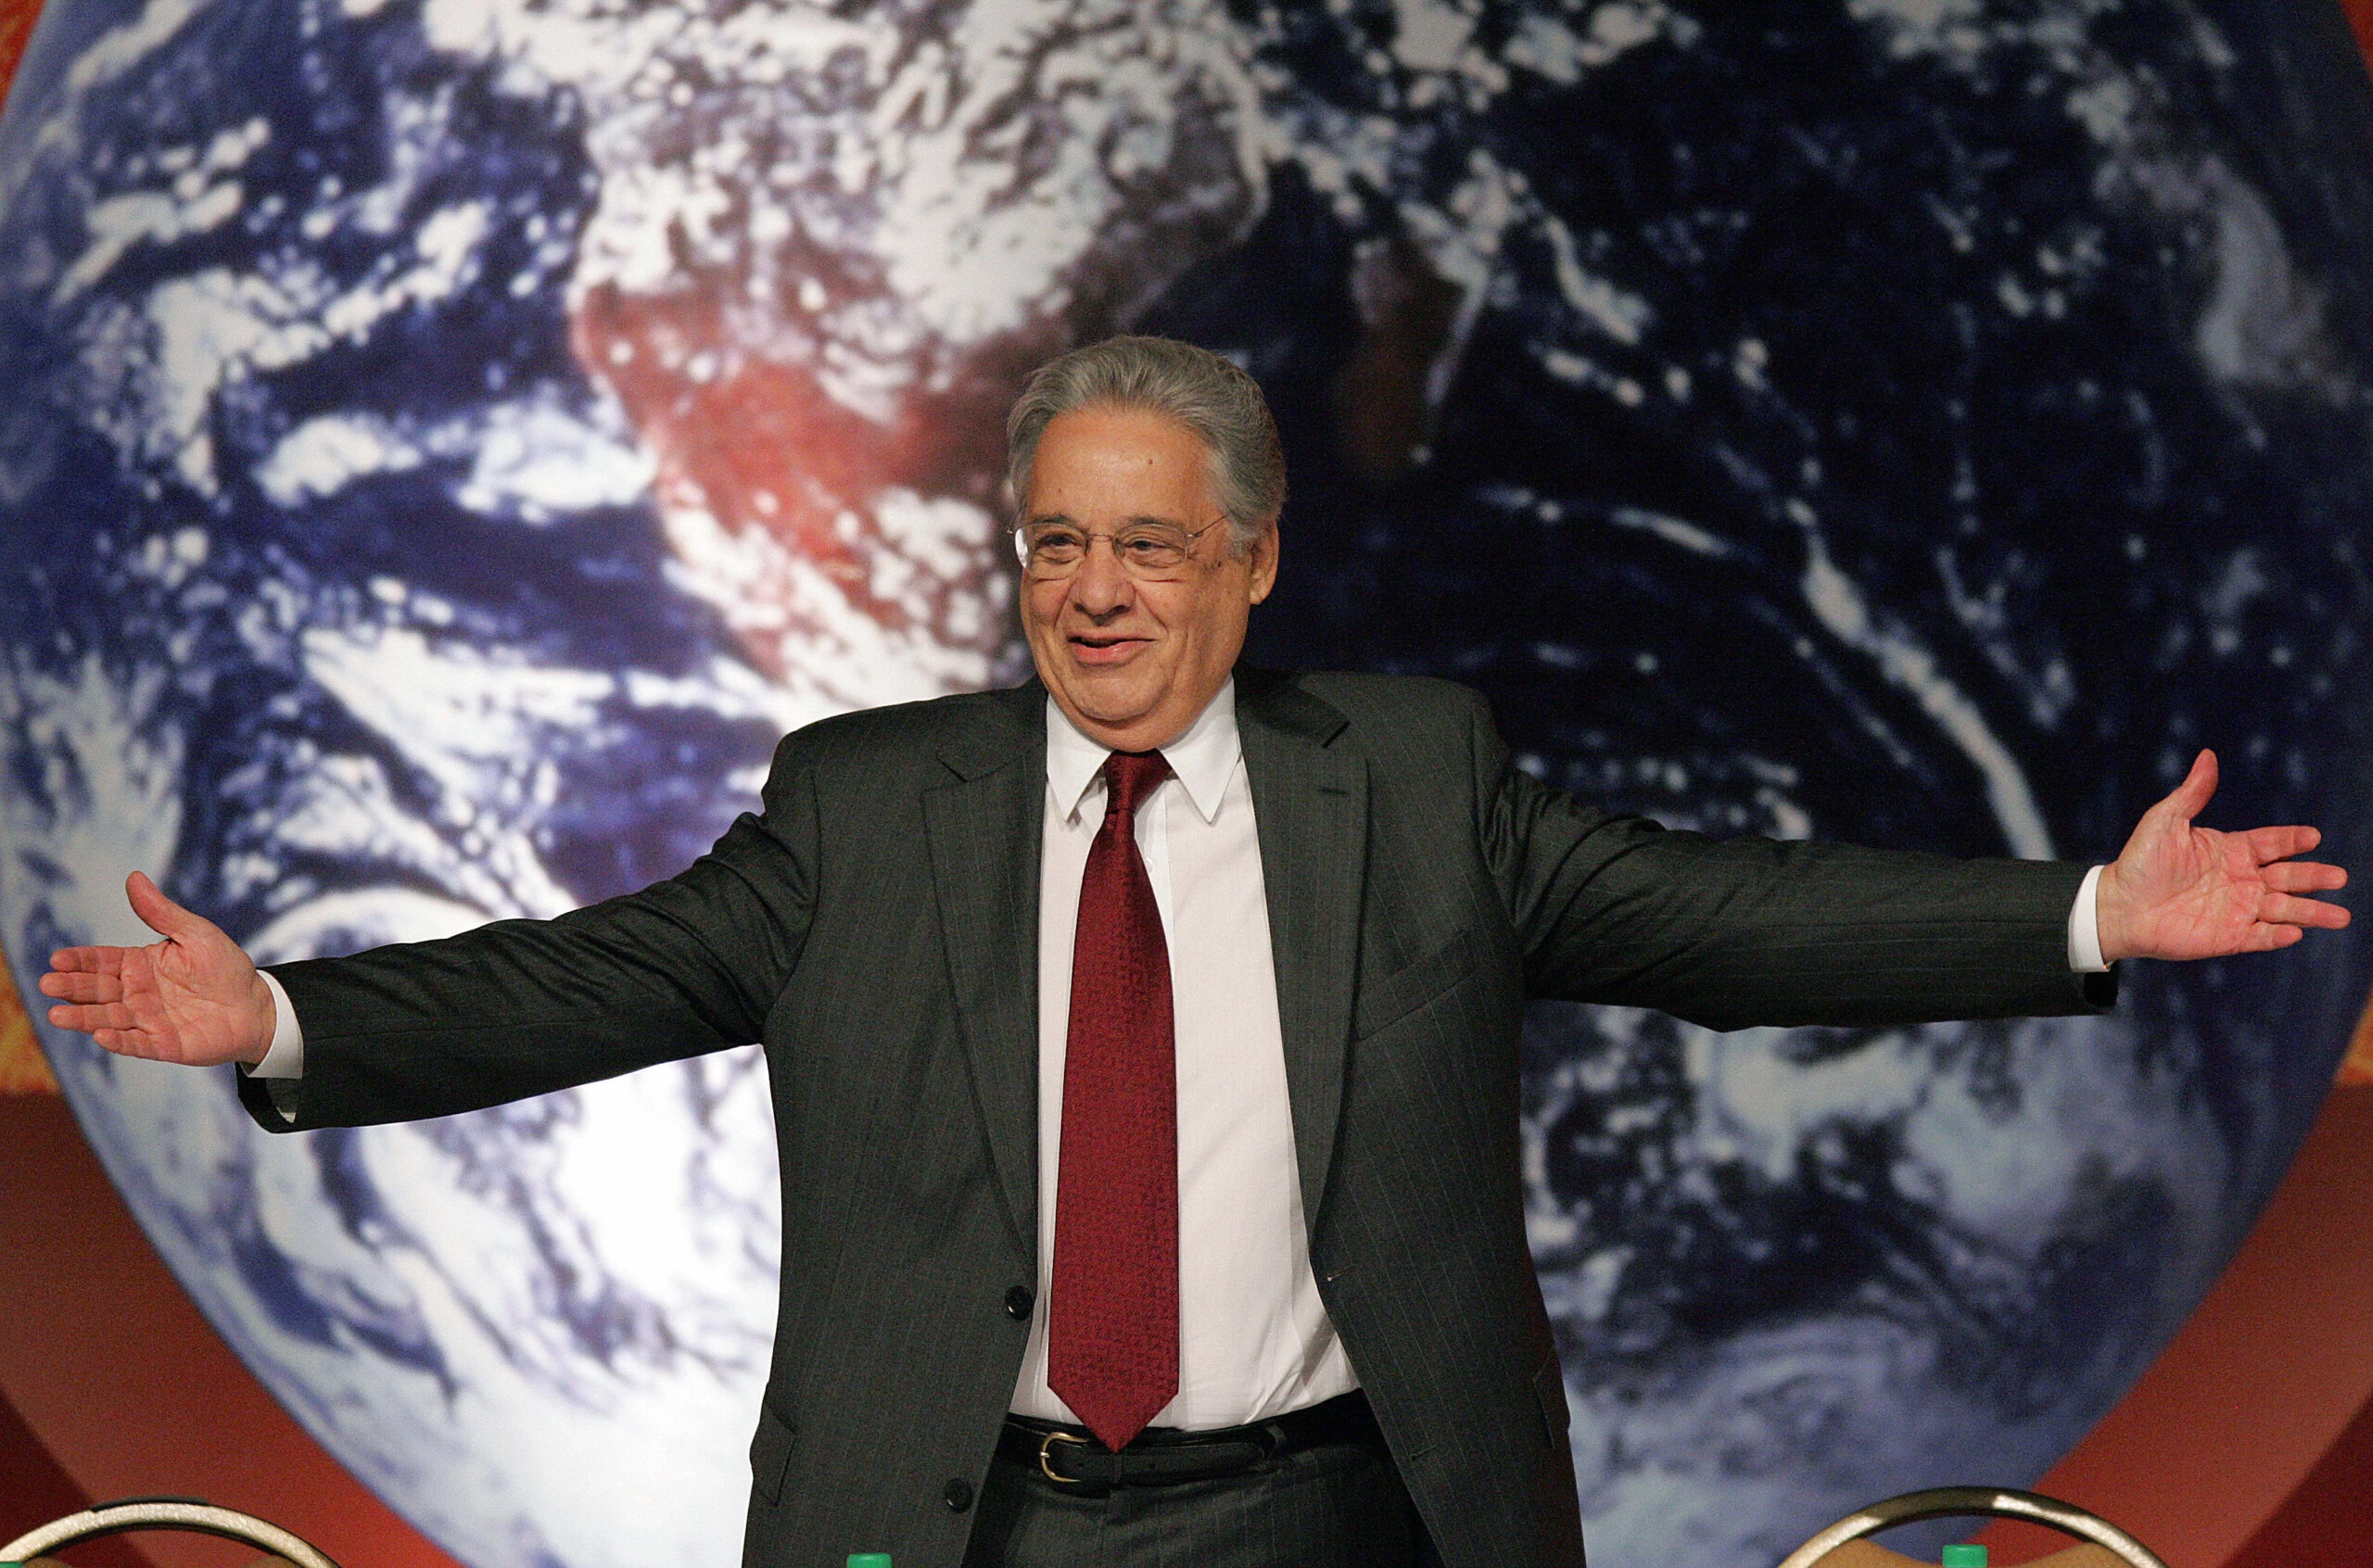 Sao Paulo, BRAZIL: Former Brazilian President Fernando Henrique Cardoso gestures during the plenary session of the Sao Paulo Ethanol Summit, 05 June 2007, in Sao Paulo, Brazil. Ethanol Summit is organized by Brazilian Sugar Cane Industry Union to discuss the future of this commodity.  AFP PHOTO/Evaristo SA (Photo credit should read EVARISTO SA/AFP/Getty Images)